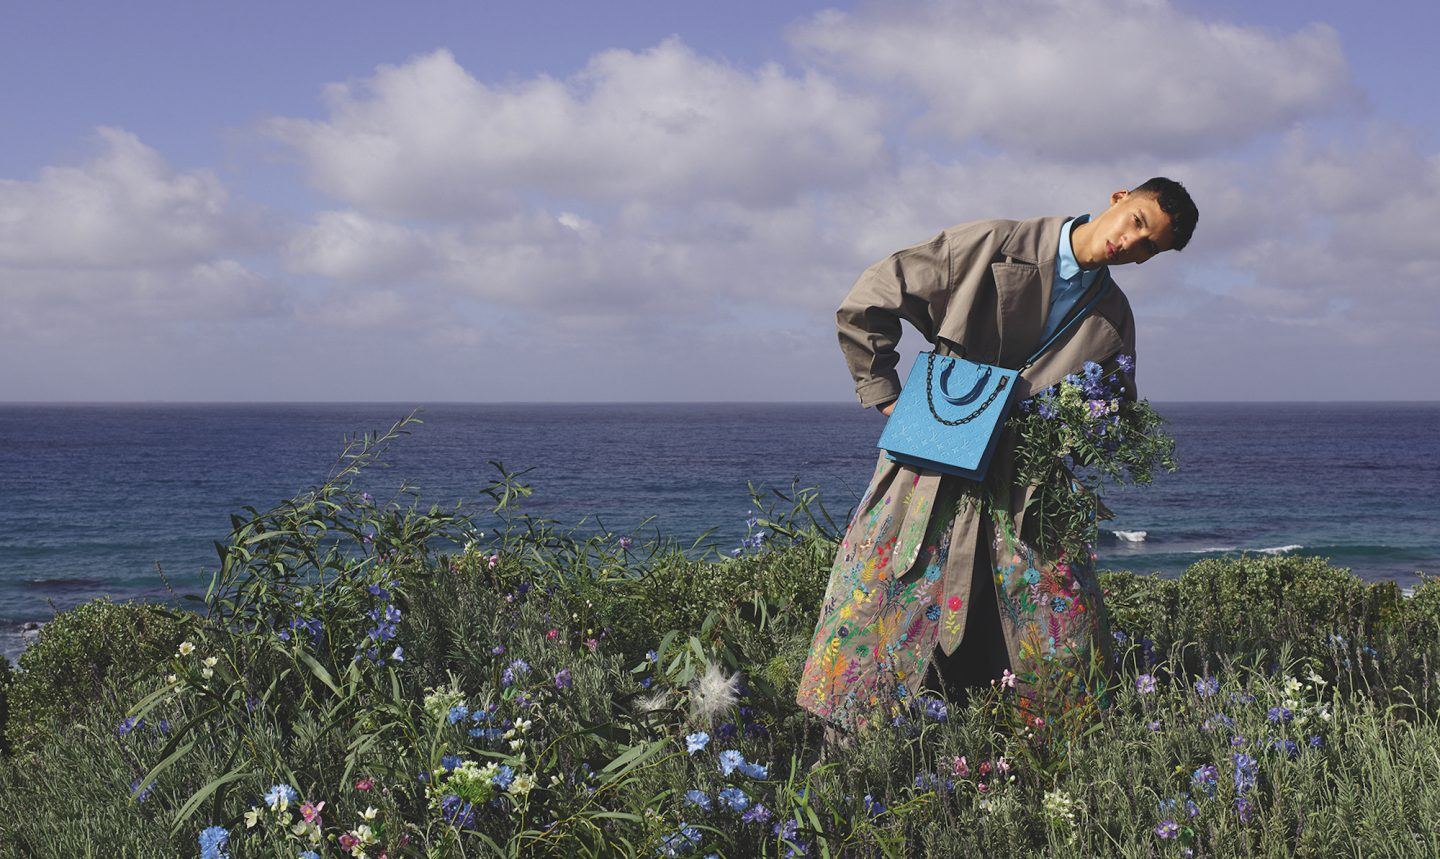 Louis Vuitton Ss21 Campaign  Natural Resource Department